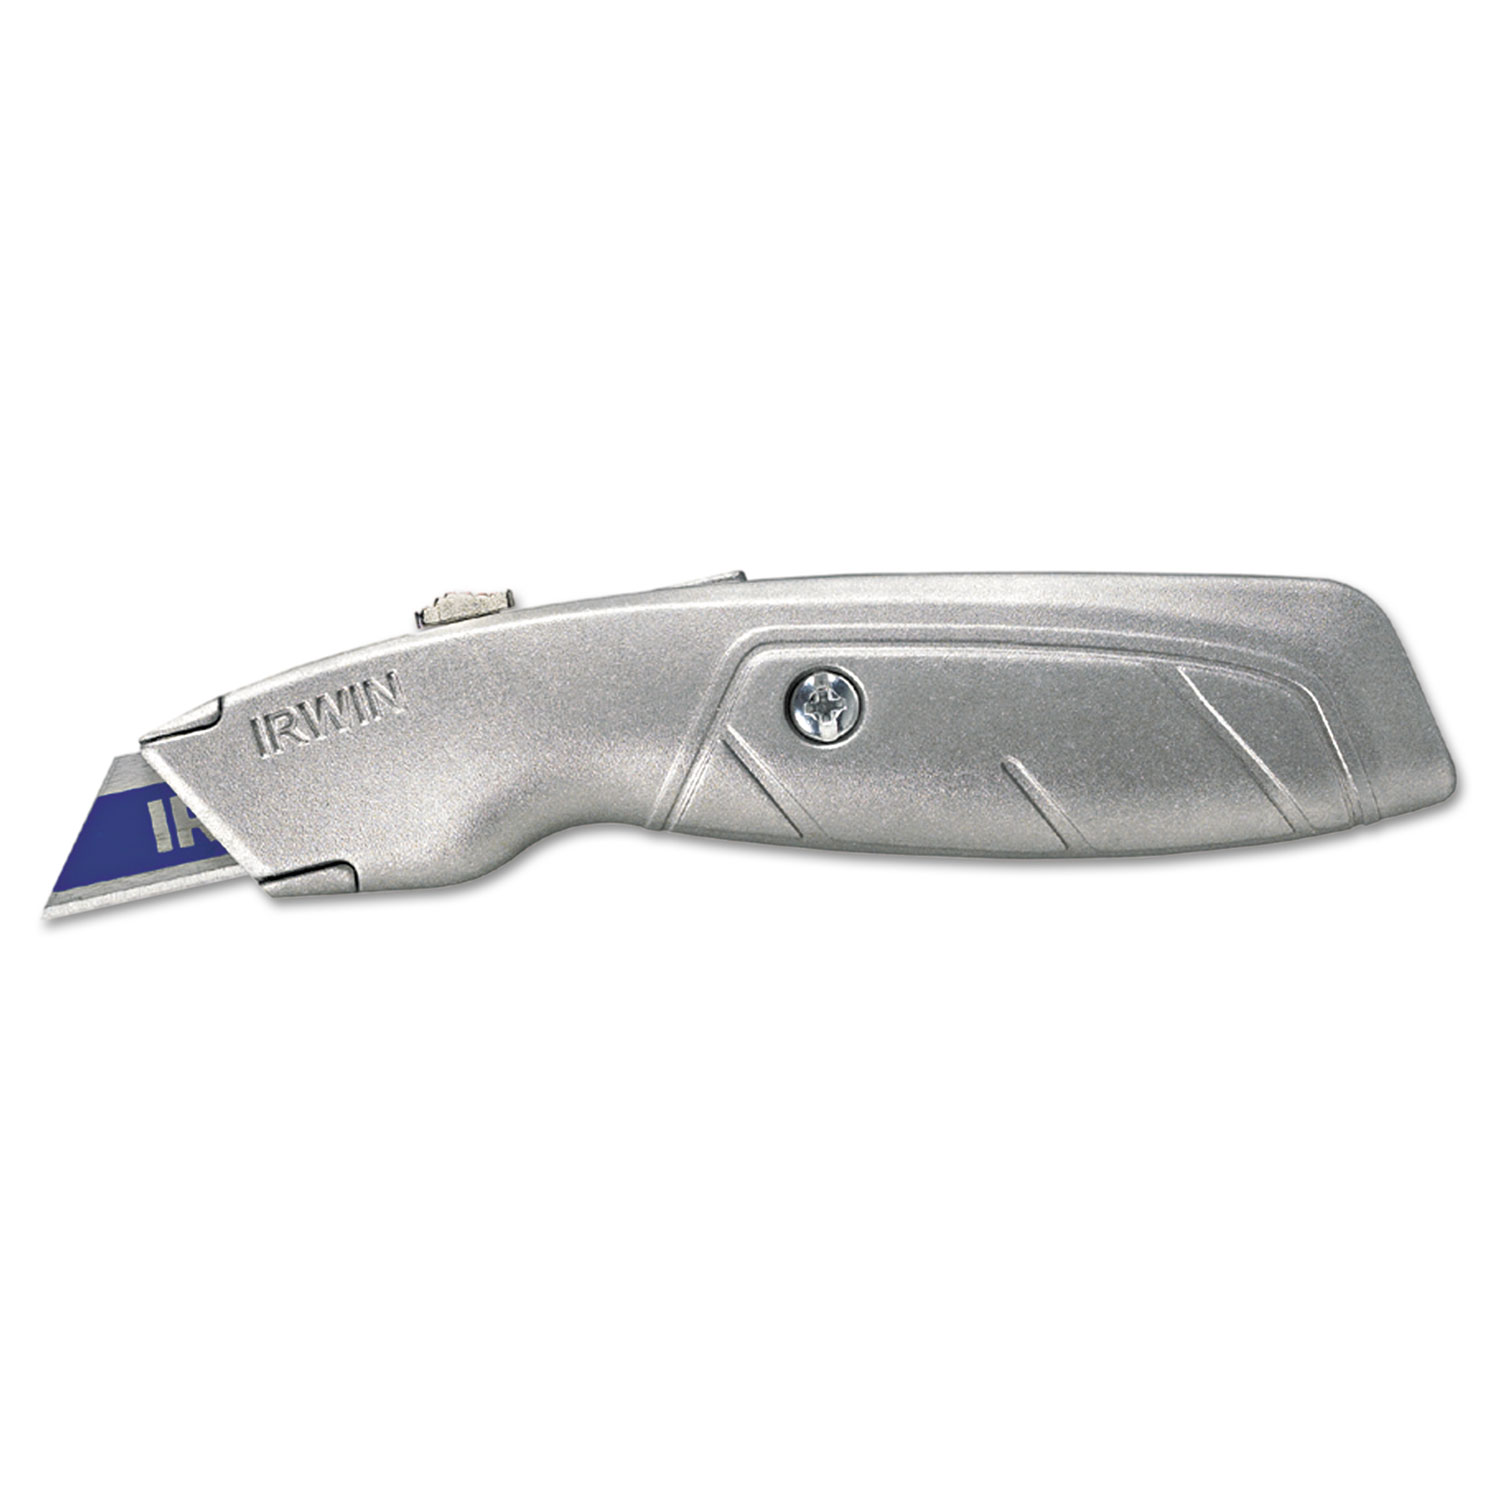 Utility Knife, Standard, Retractable